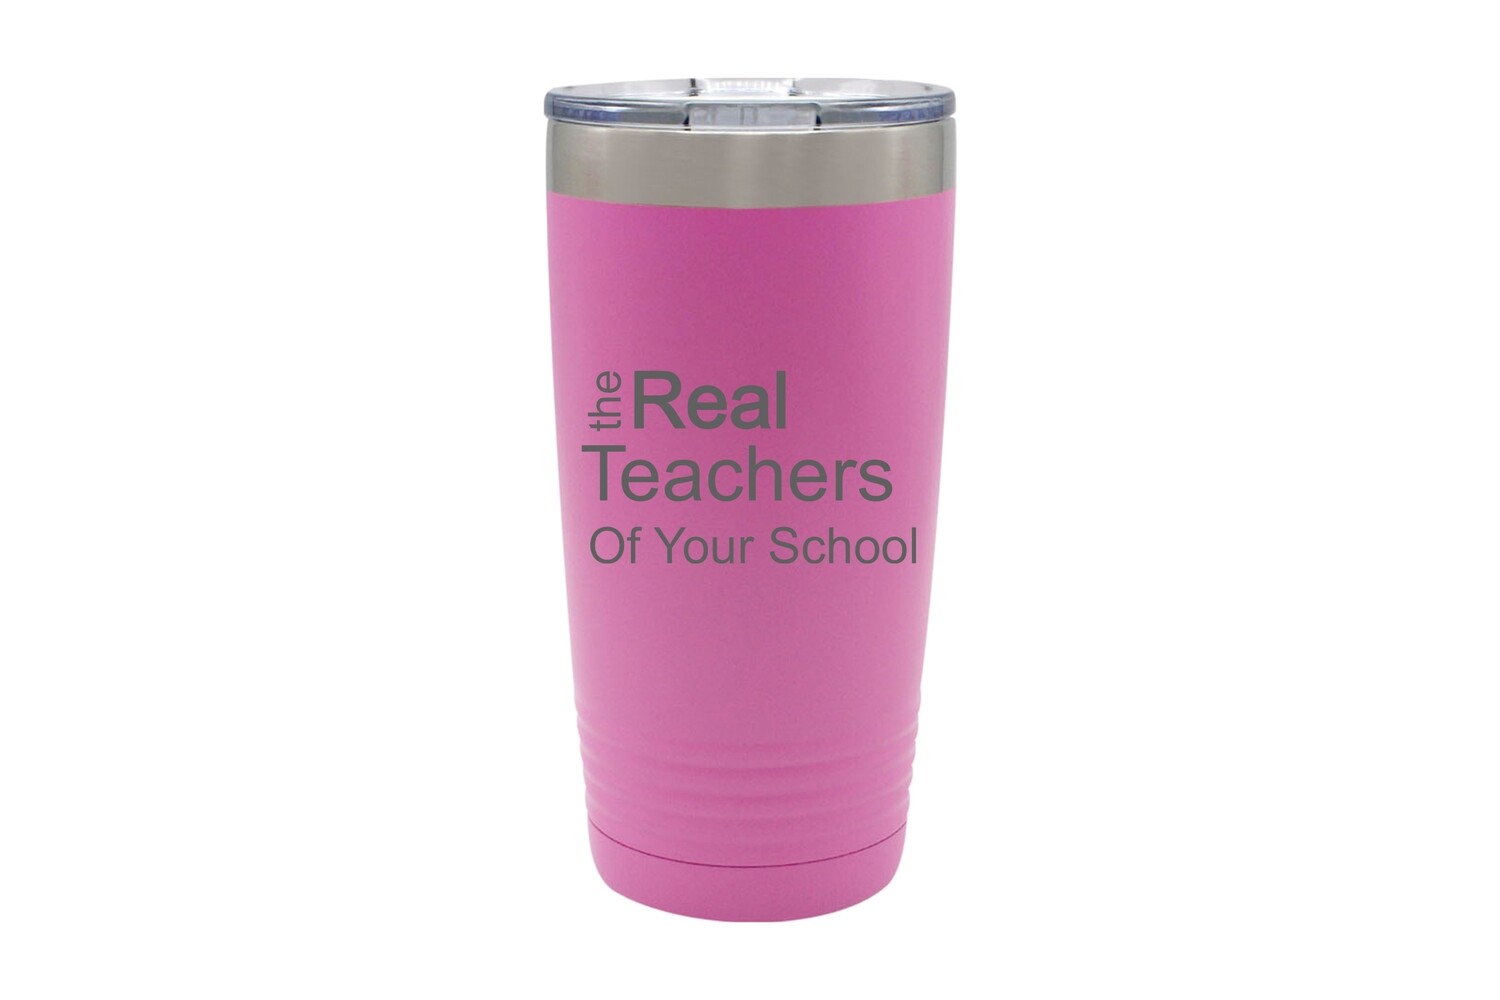 The Real Teachers of (Add Your School) Insulated Tumbler 20 oz